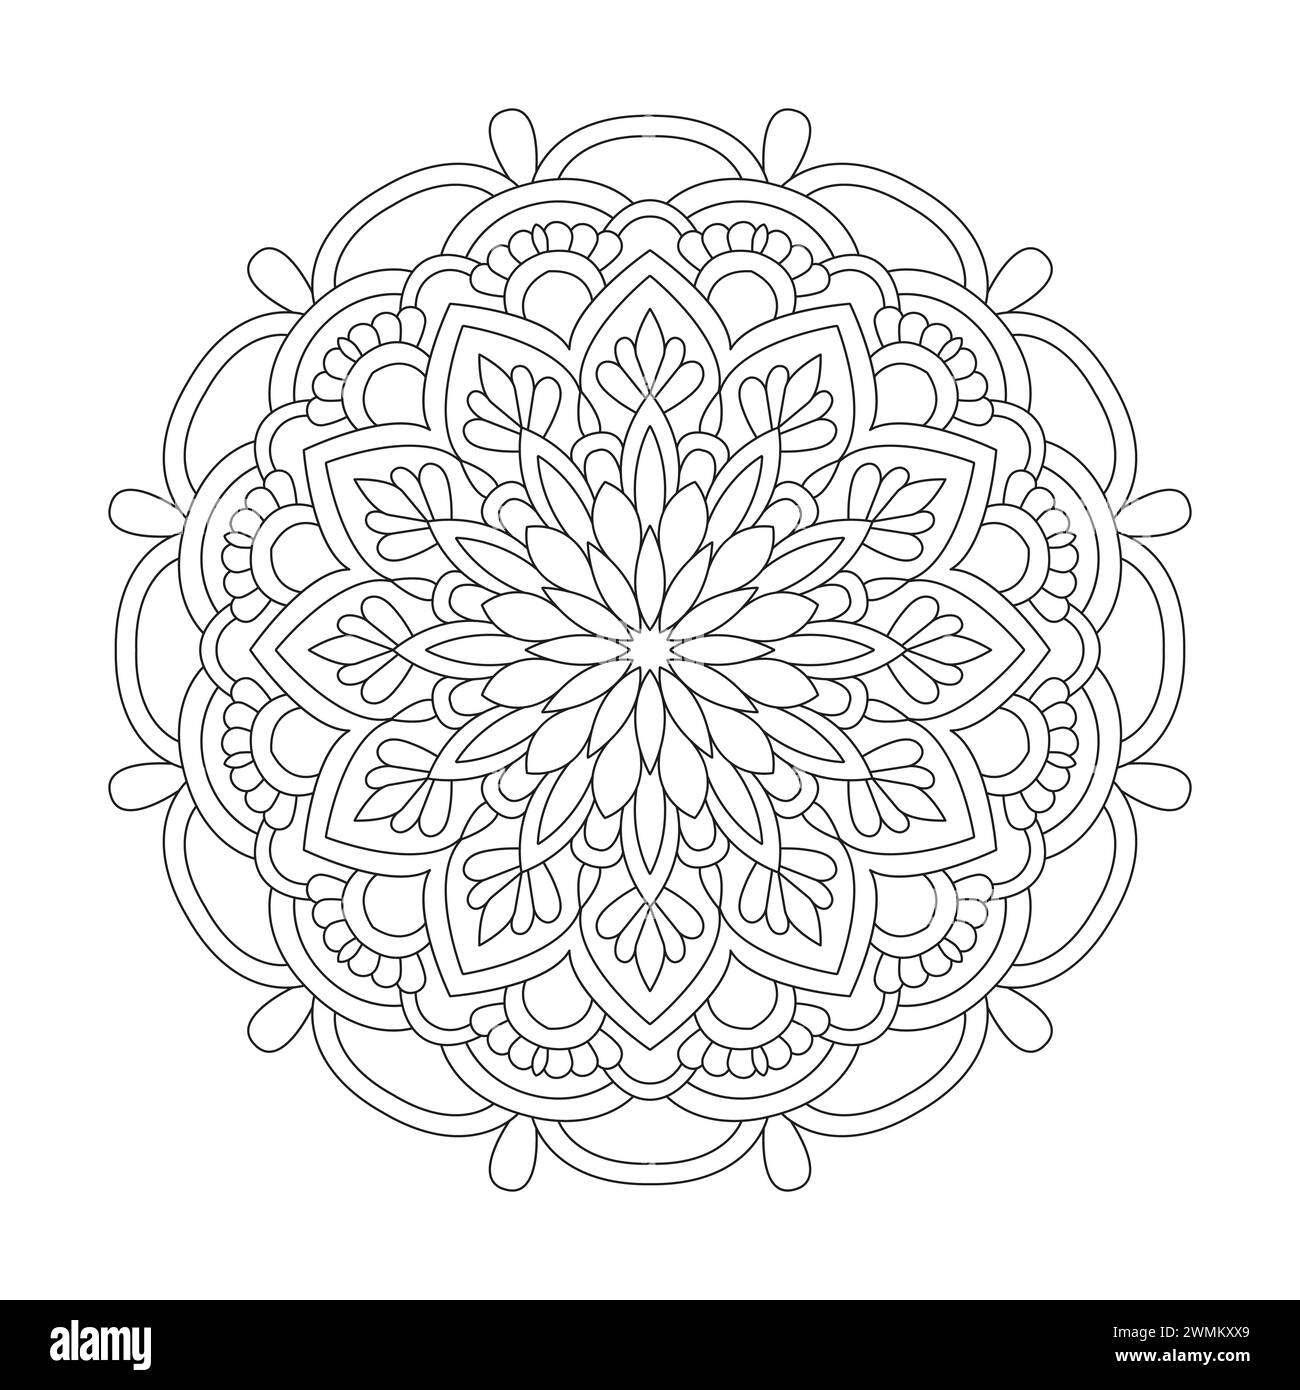 Luminous Relaxation Mandala Coloring Book Page for kdp Book Interior. Peaceful Petals, Ability to Relax, Brain Experiences, Harmonious Haven, Peaceful Stock Vector